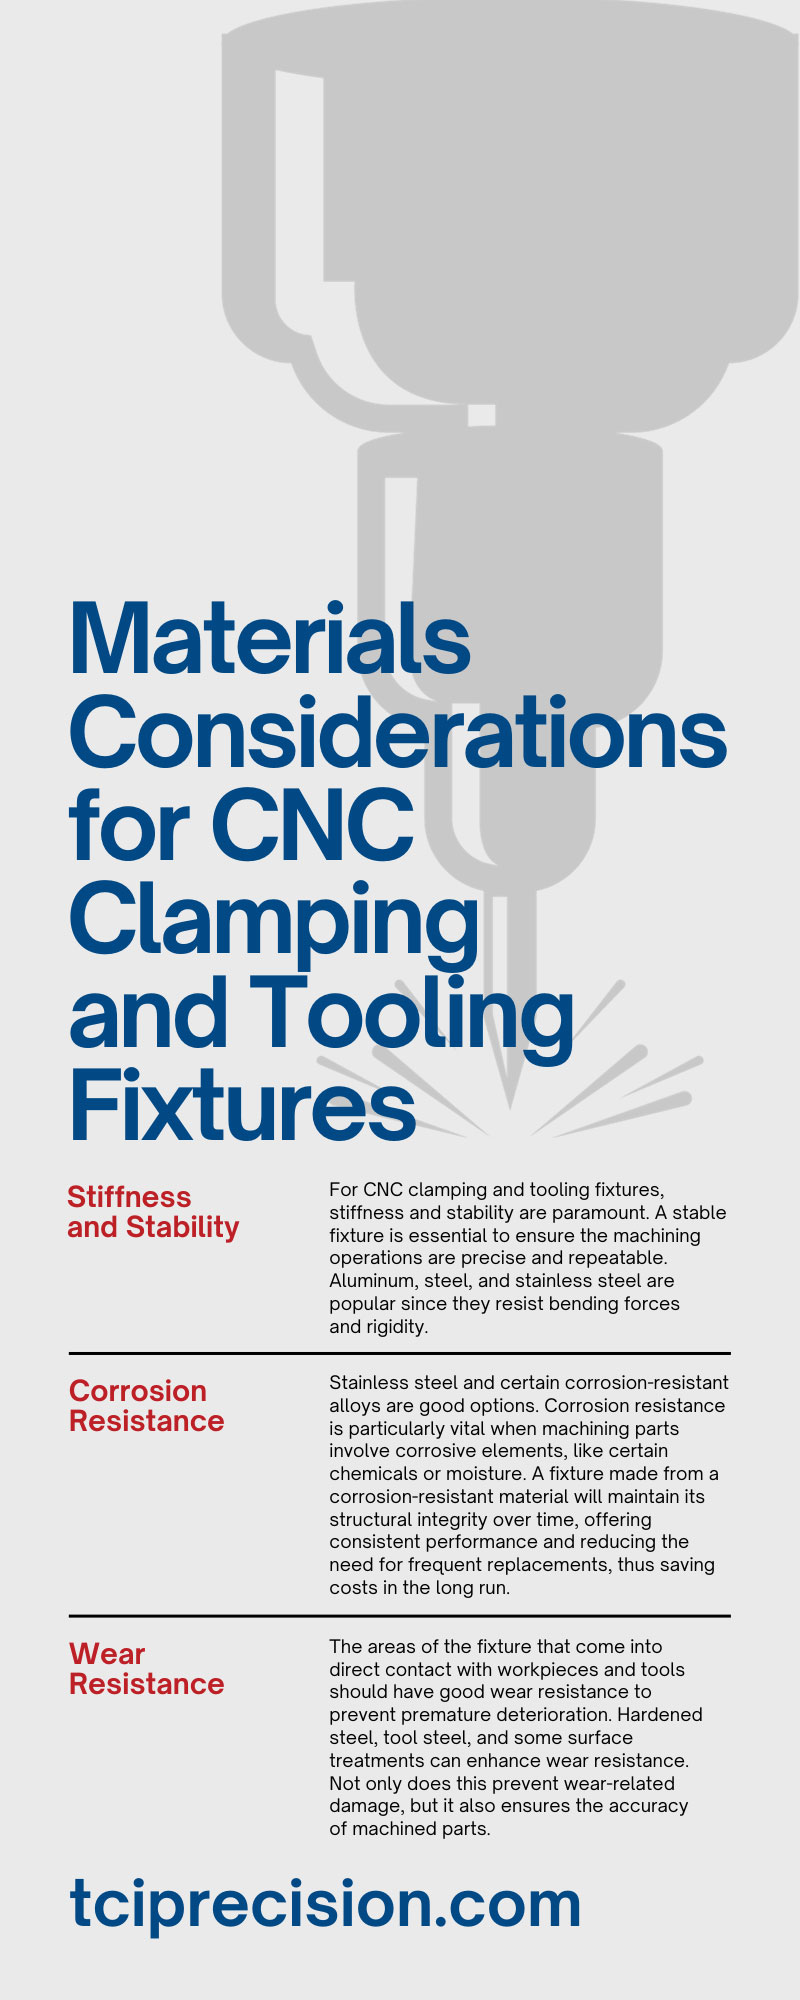 Materials Considerations for CNC Clamping and Tooling Fixtures